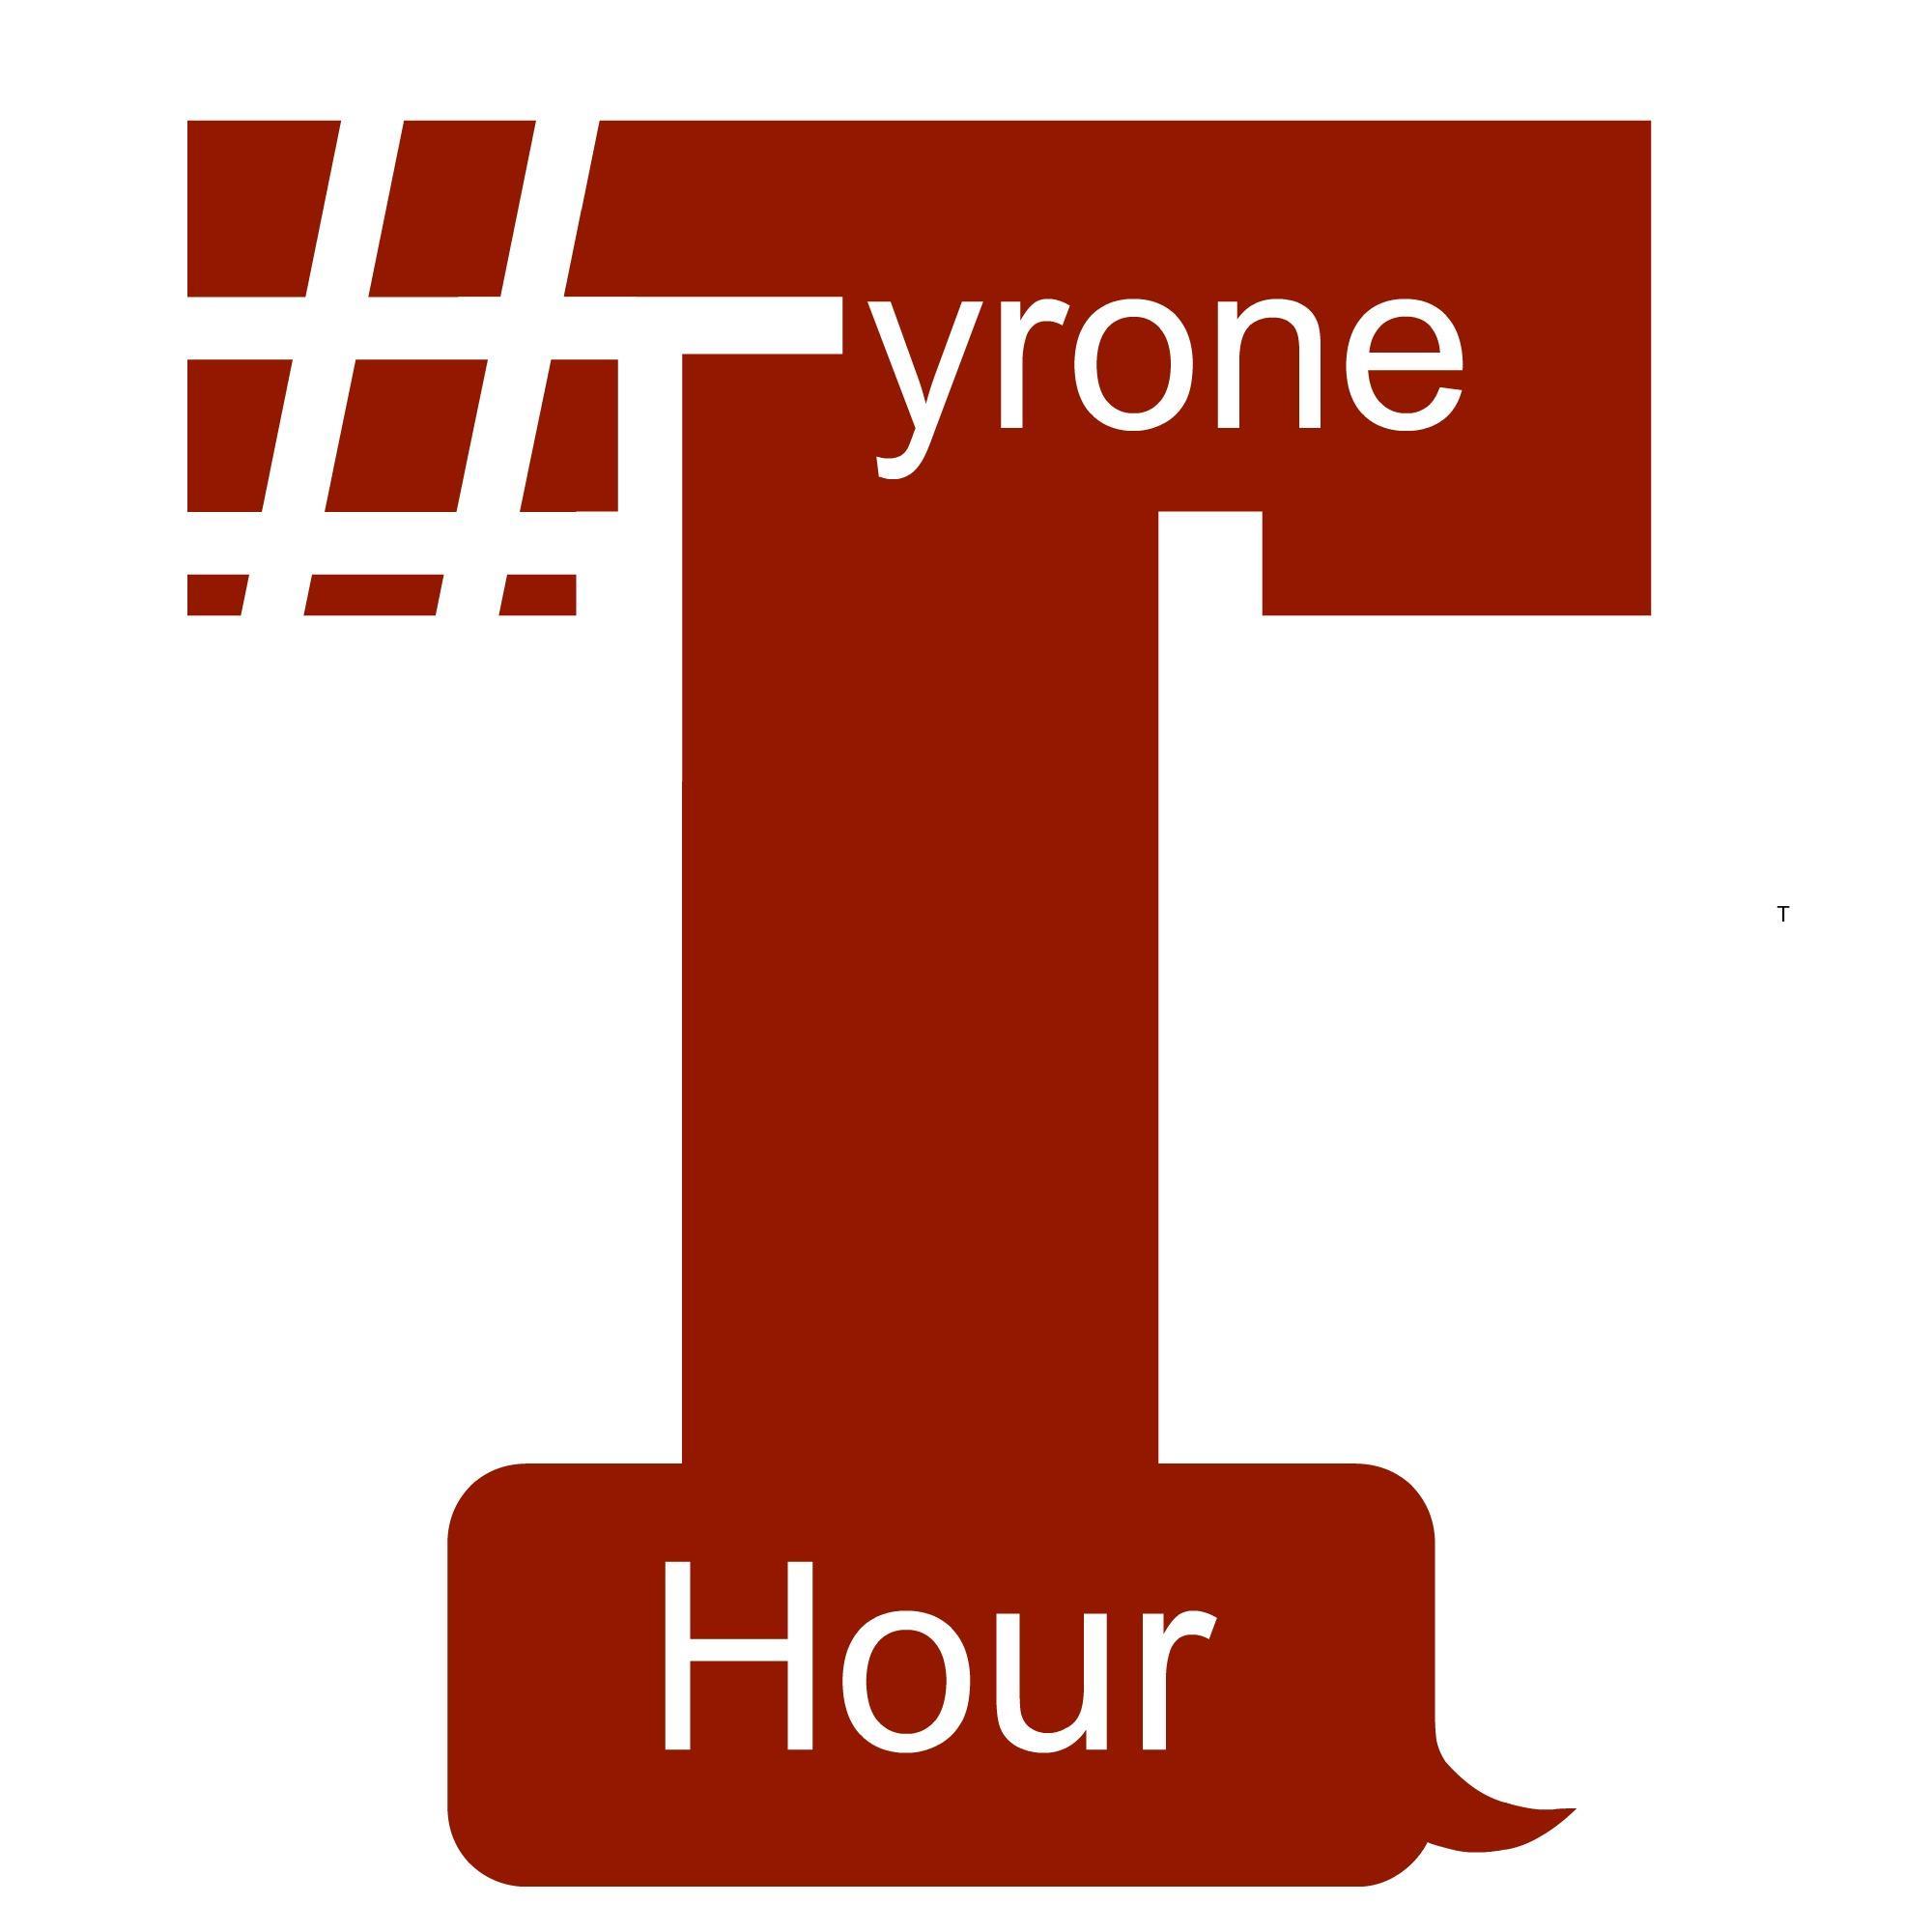 #Tyronehour hashtag connects & promotes businesses & businesses with interests in #Tyrone. Weekly one hour chat every Monday 9-10pm. RT not an endorsement.